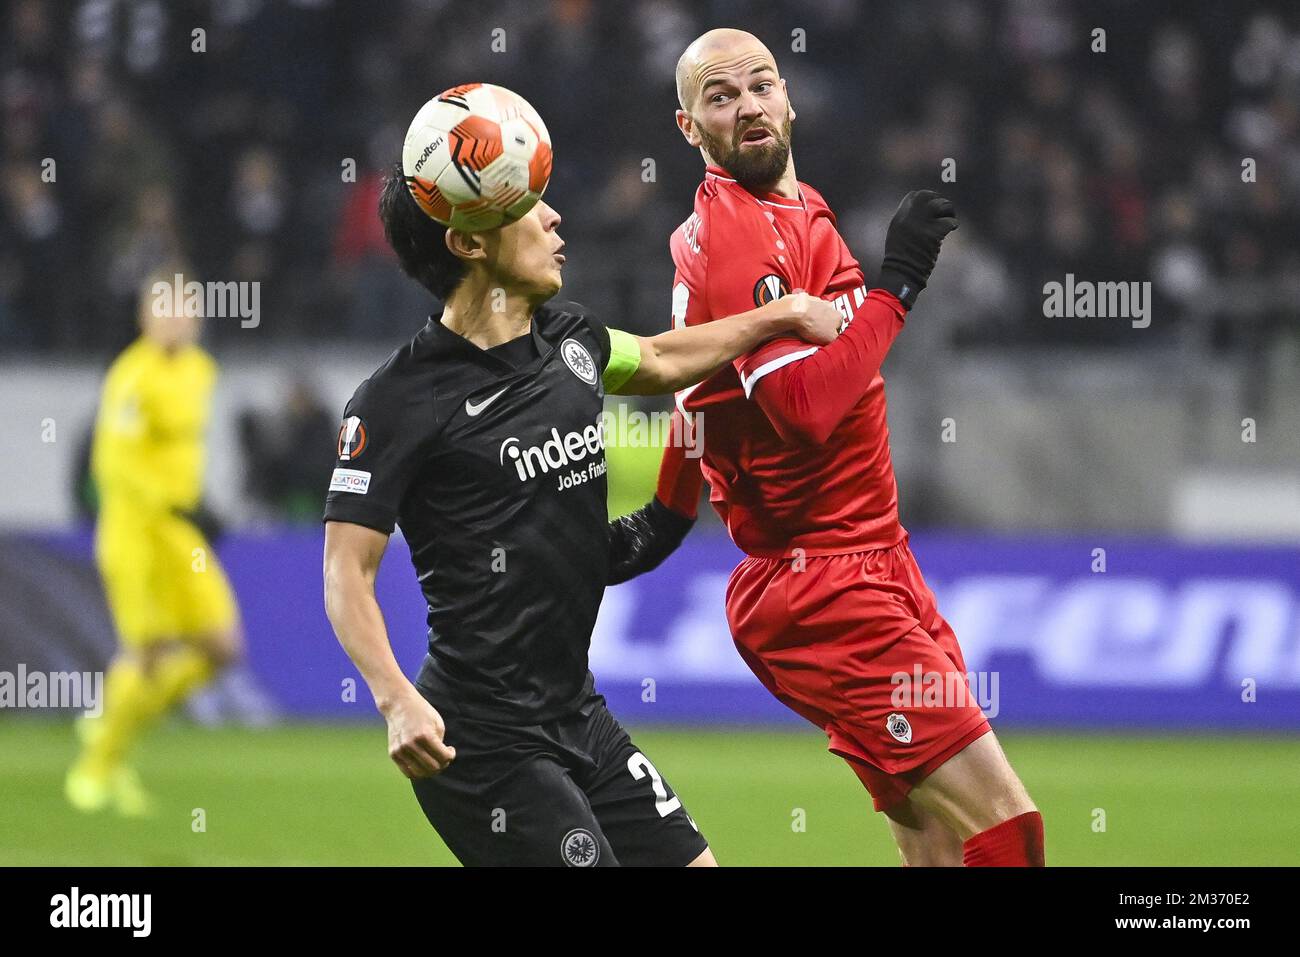 Eintracht's Makoto Hasebe and Antwerp's Dorian Dessoleil fight for the ball during a soccer game between German Eintracht Frankfurt and Belgian Royal Antwerp FC, Thursday 25 November 2021 in Frankfurt, Germany, game five (out of six) in Group D of the UEFA Europa League group stage. BELGA PHOTO LAURIE DIEFFEMBACQ Stock Photo